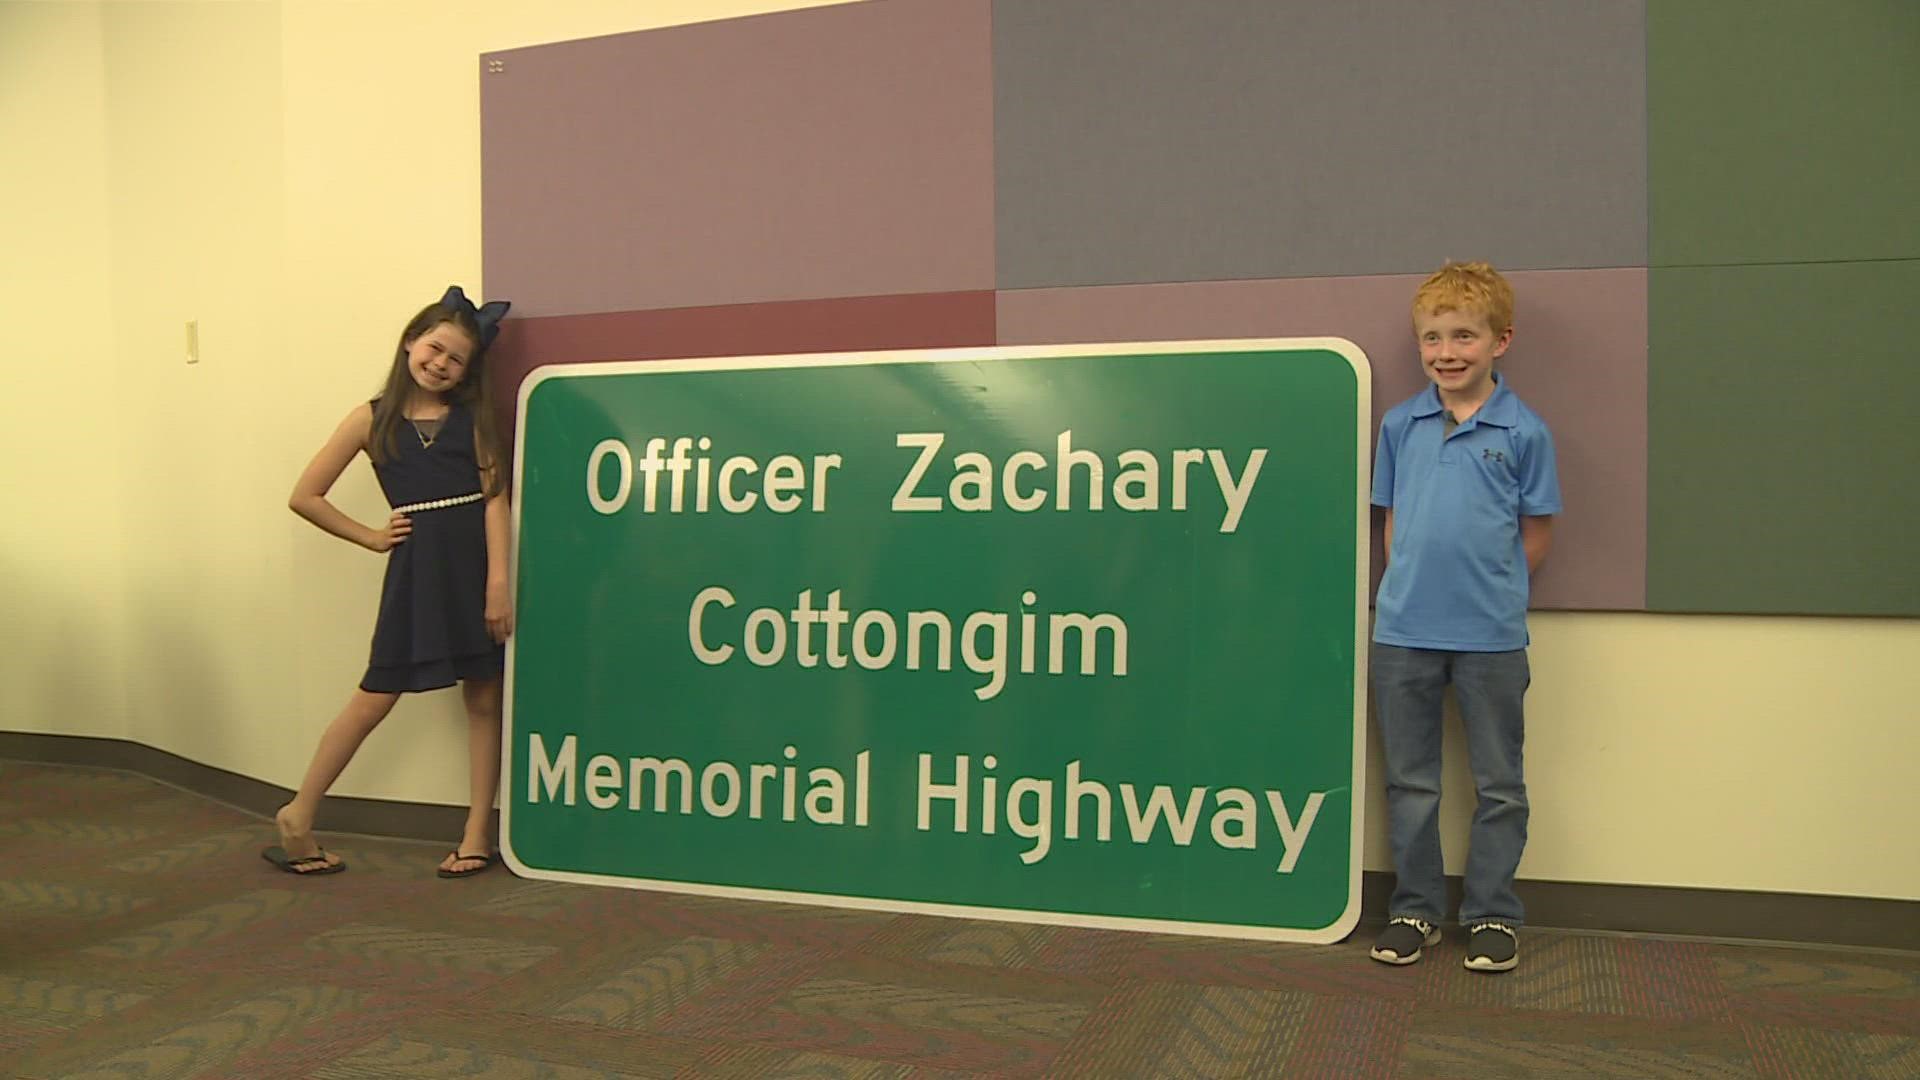 Officer Zachary Cottongim died when he was hit by a vehicle on I-64 while assisting a wrecked vehicle on the roadside.